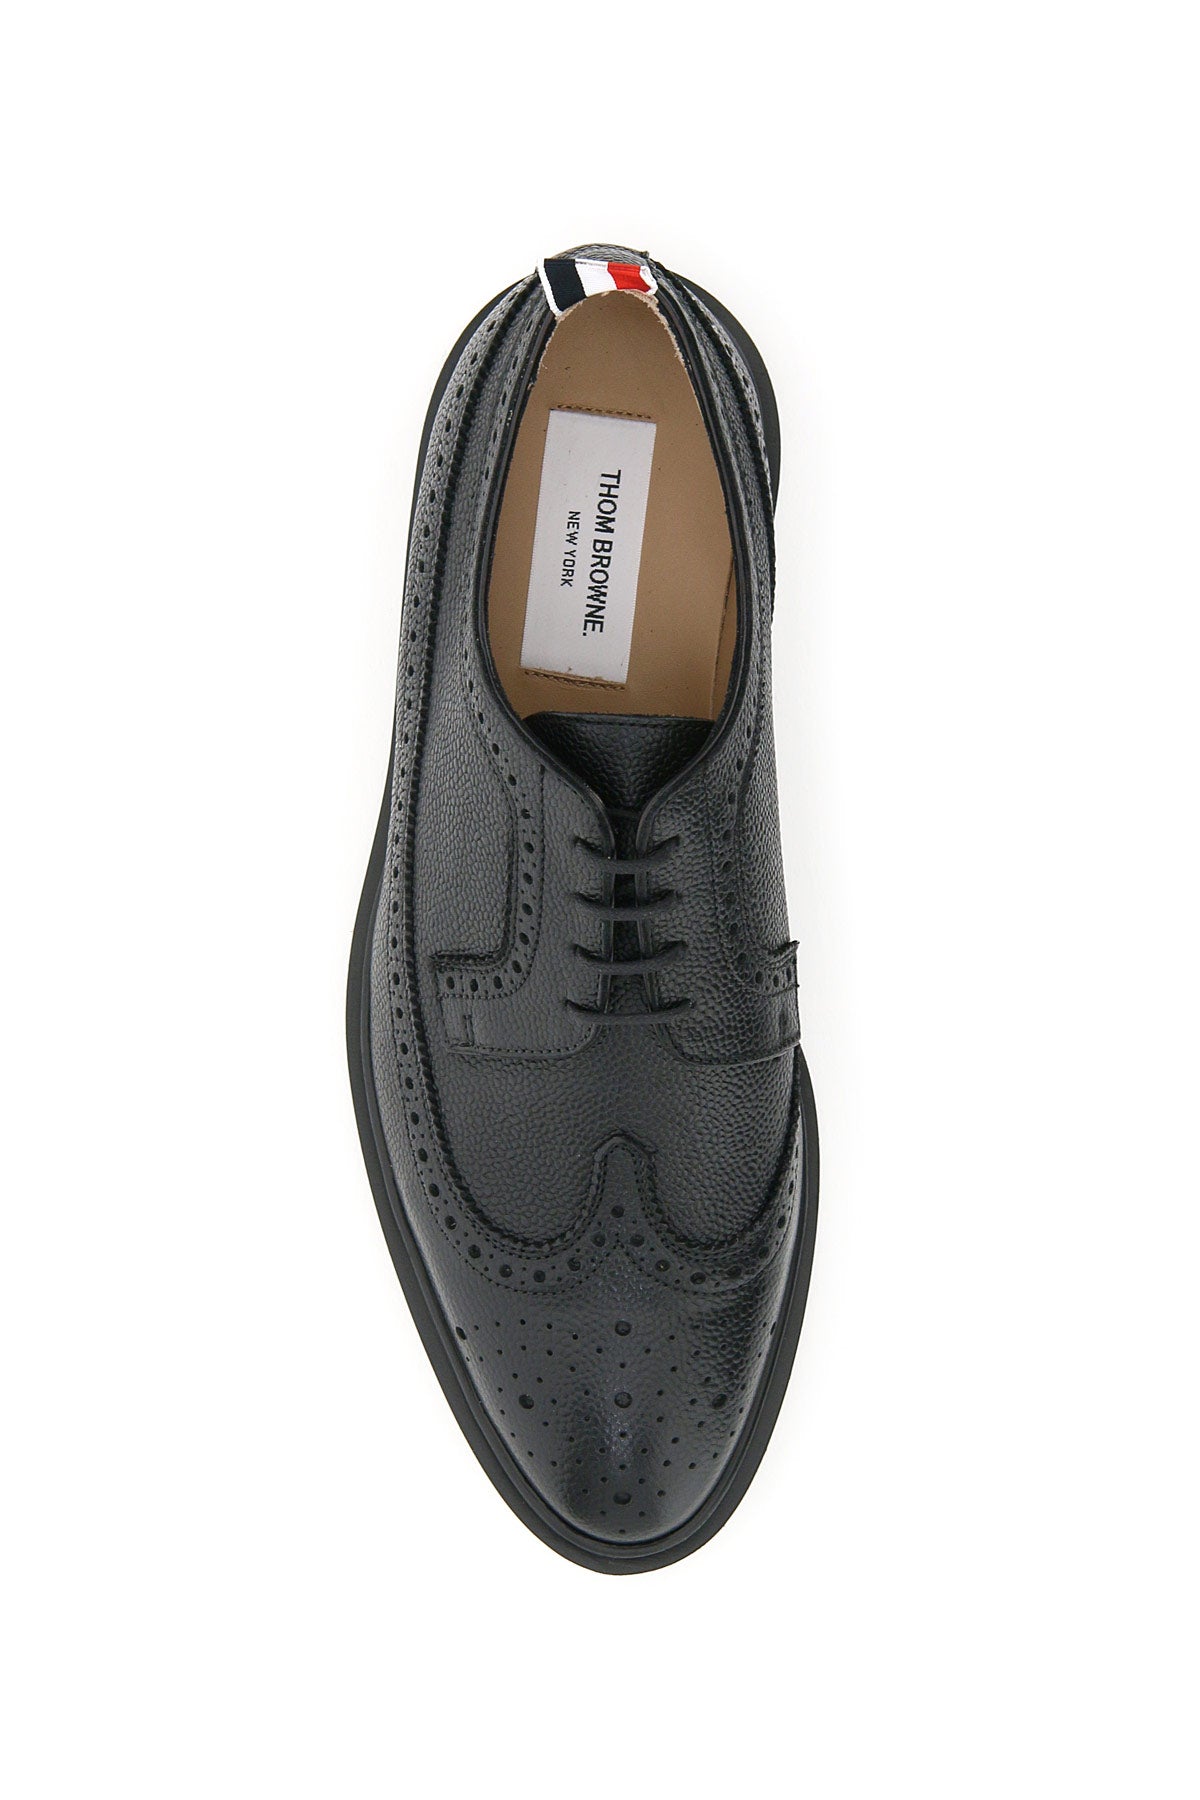 Thom Browne Thom browne longwing brogue lace-up shoes